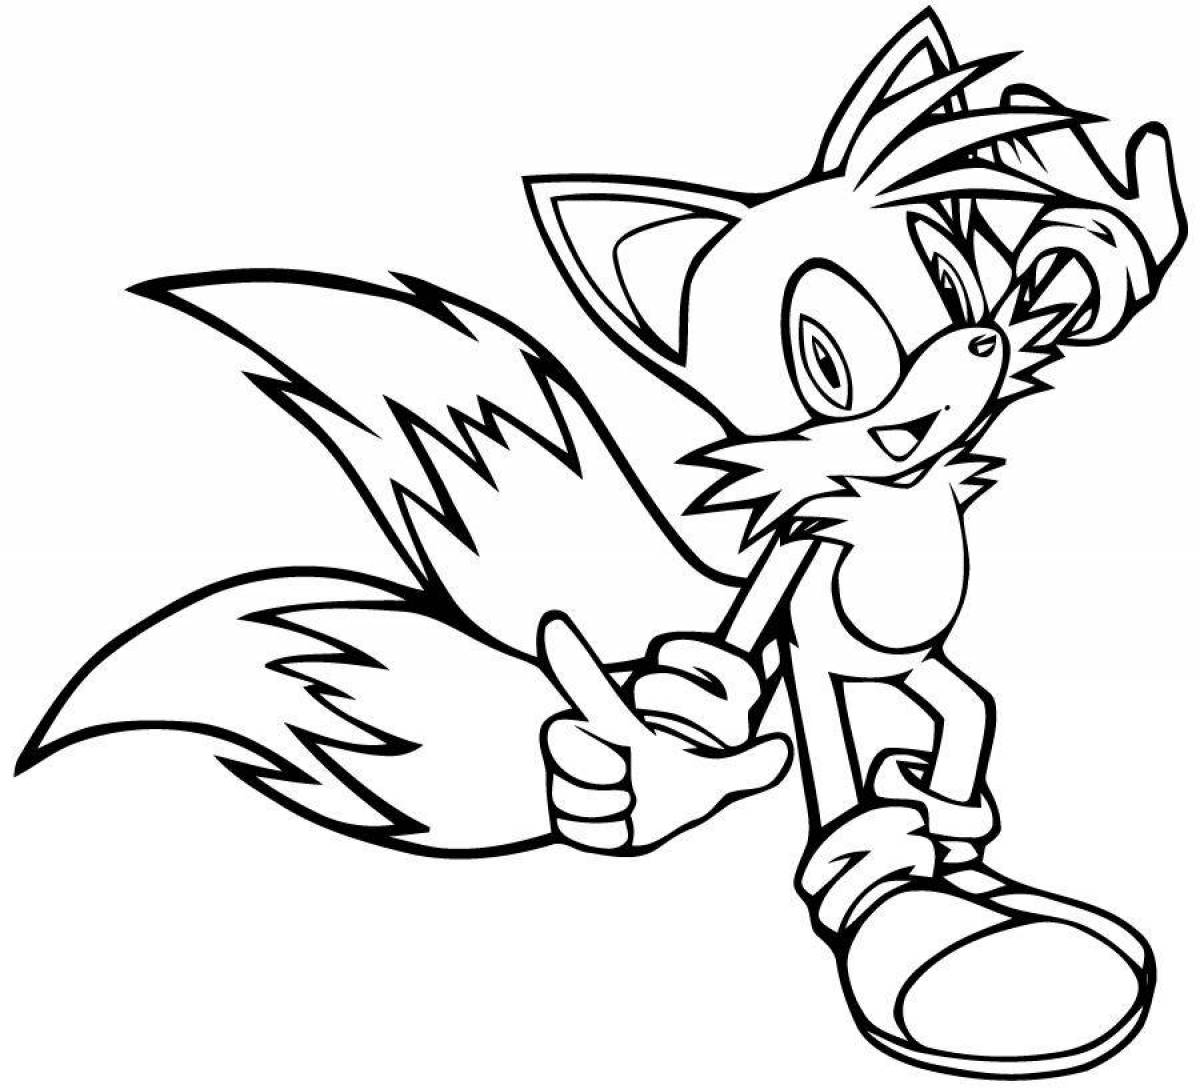 Funny sonic and tails coloring book